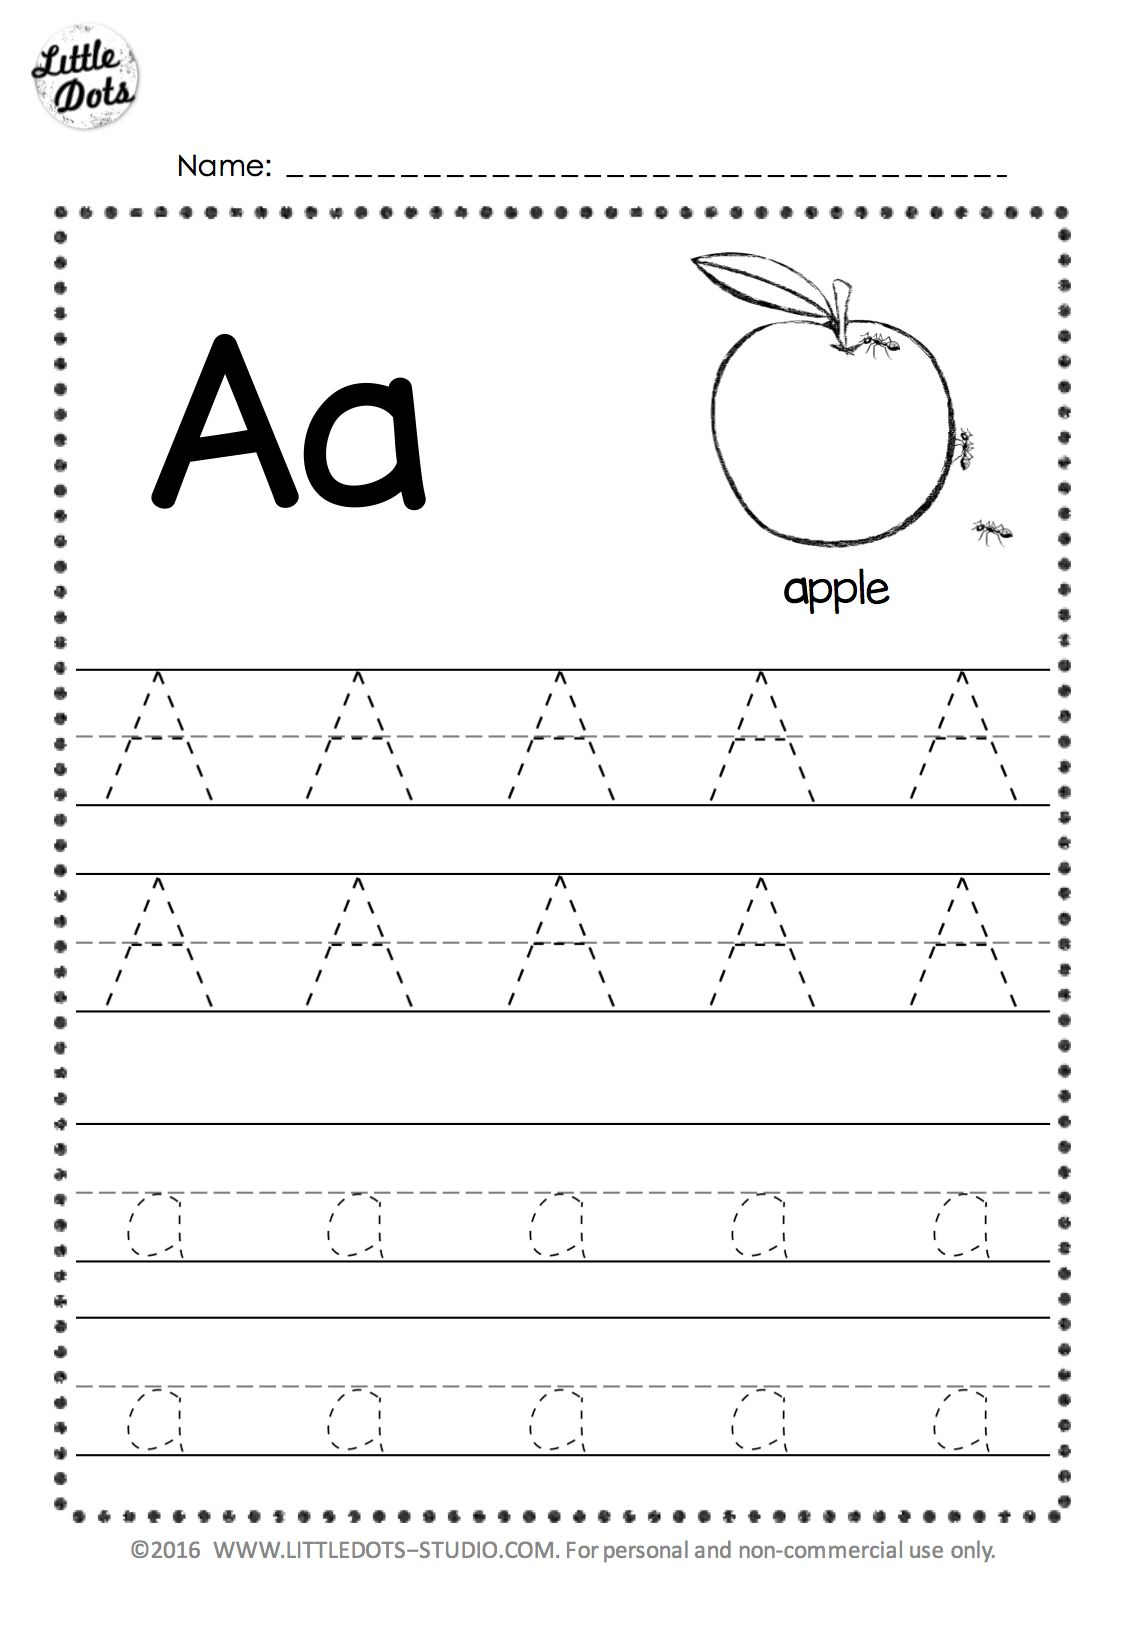 Free Letter A Tracing Worksheets | Alphabet Worksheets for Tracing Letters Download